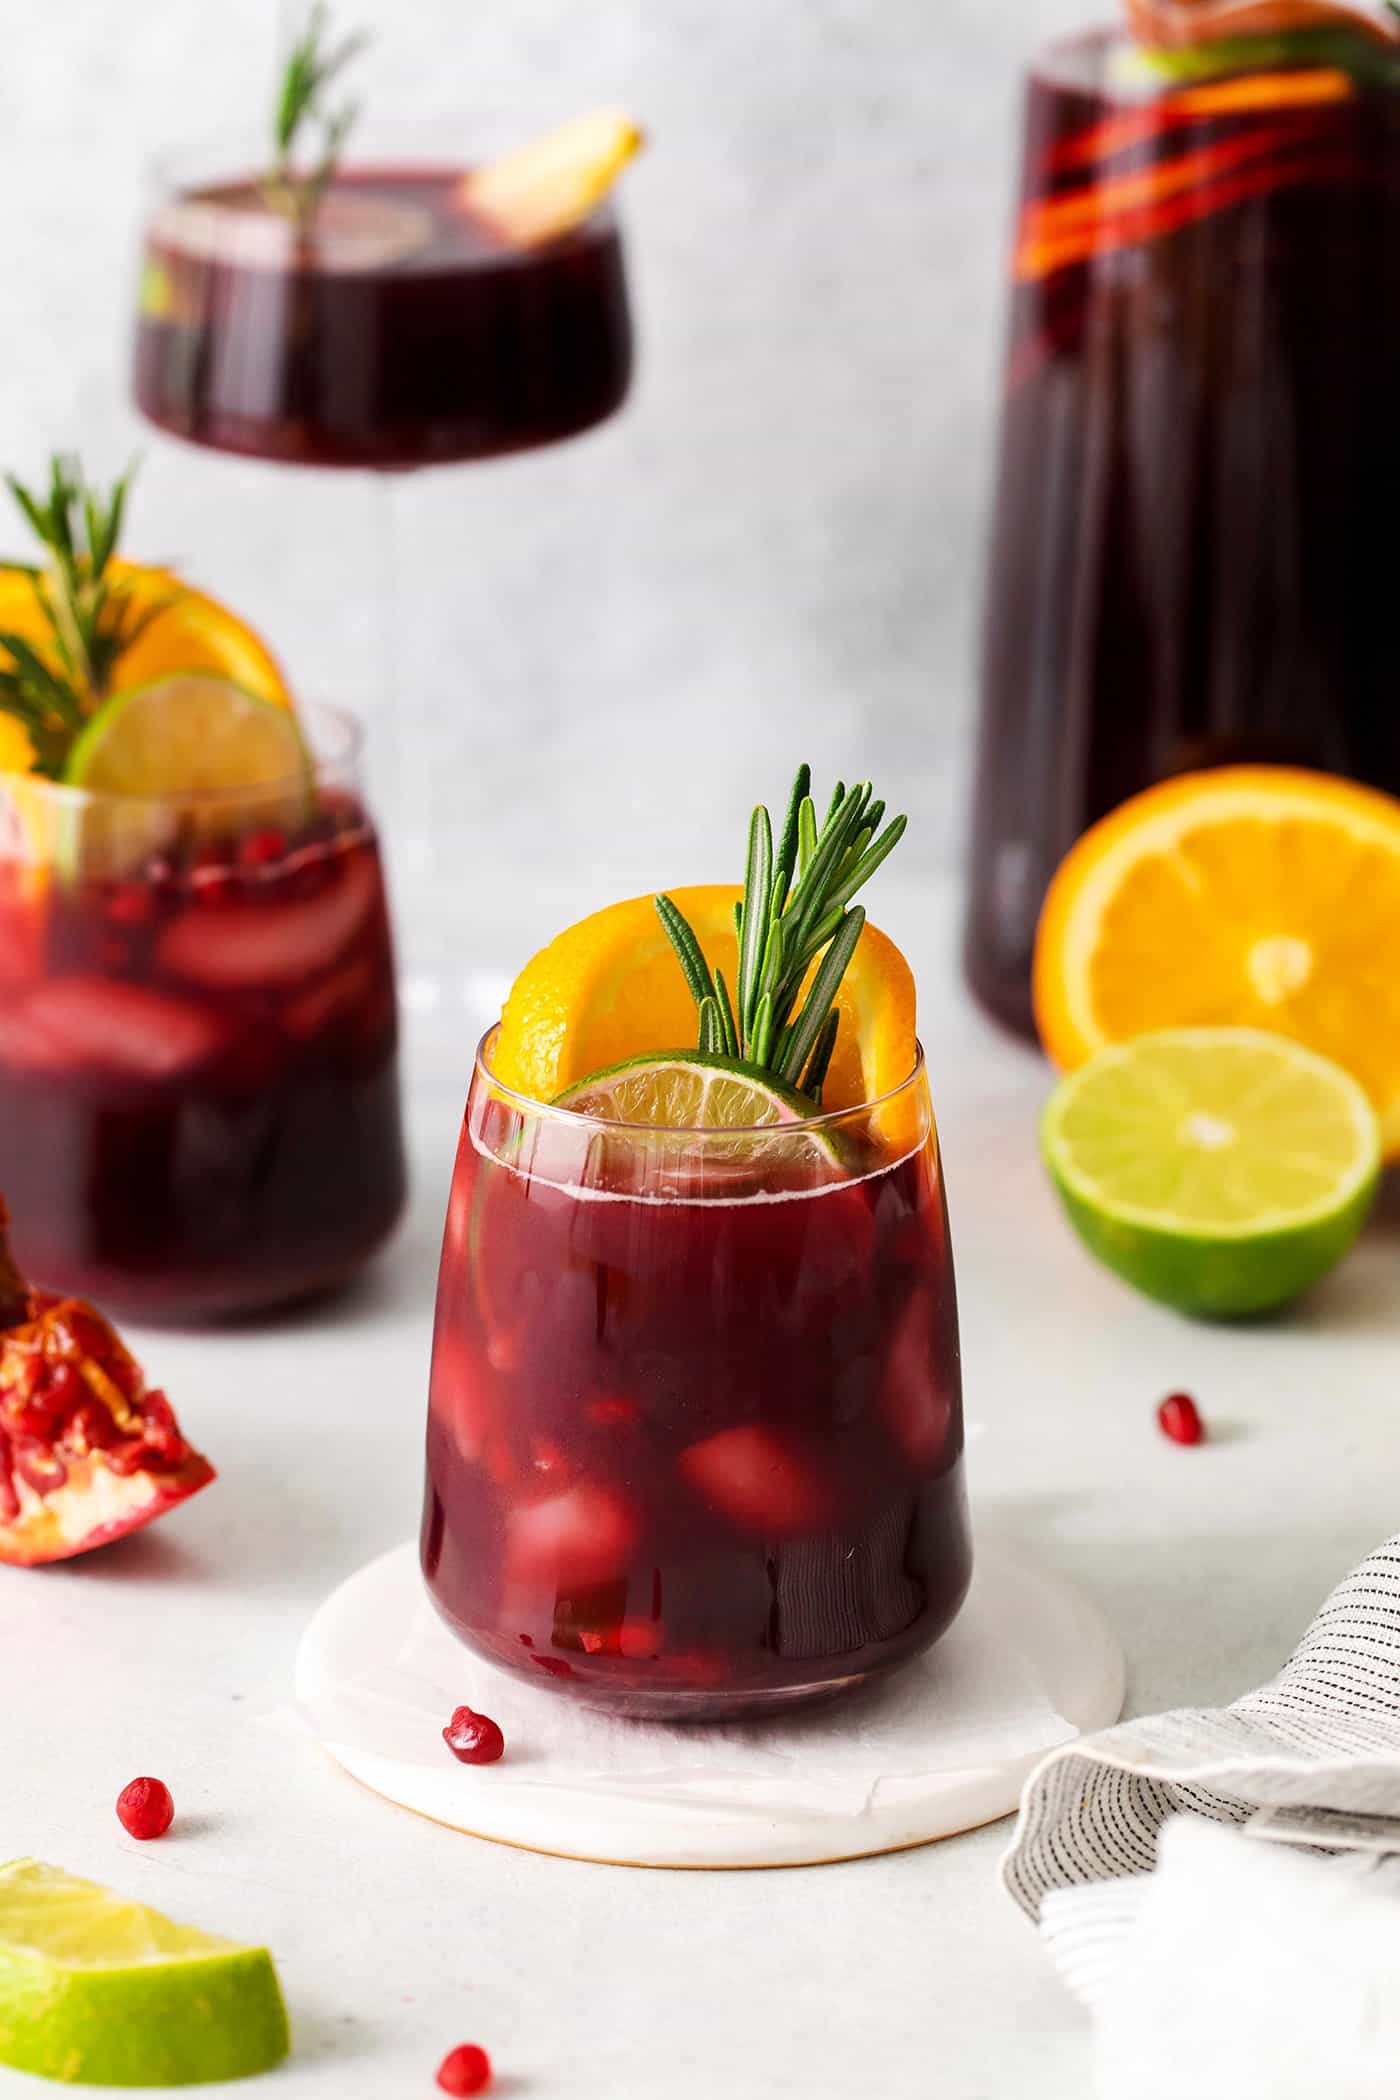 Glasses of red Christmas sangria are shown with a glass carafe of sangria in the background, and a cut orange, lime, and pomegranate nearby.